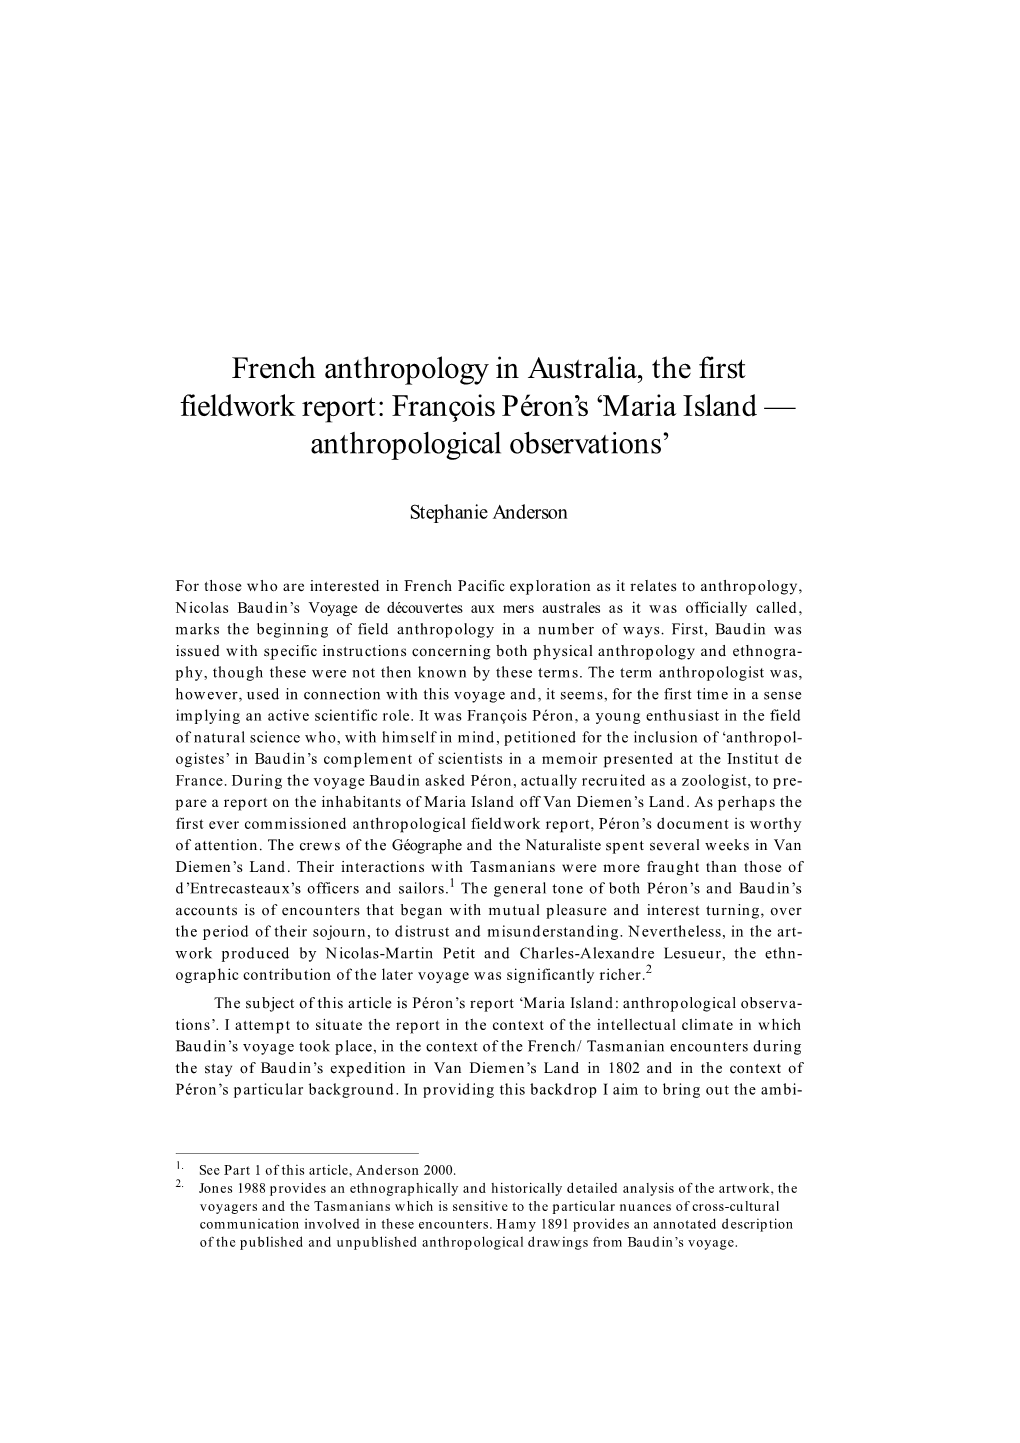 French Anthropology in Australia, the First Fieldwork Report: François Péron’S ‘Maria Island — Anthropological Observations’